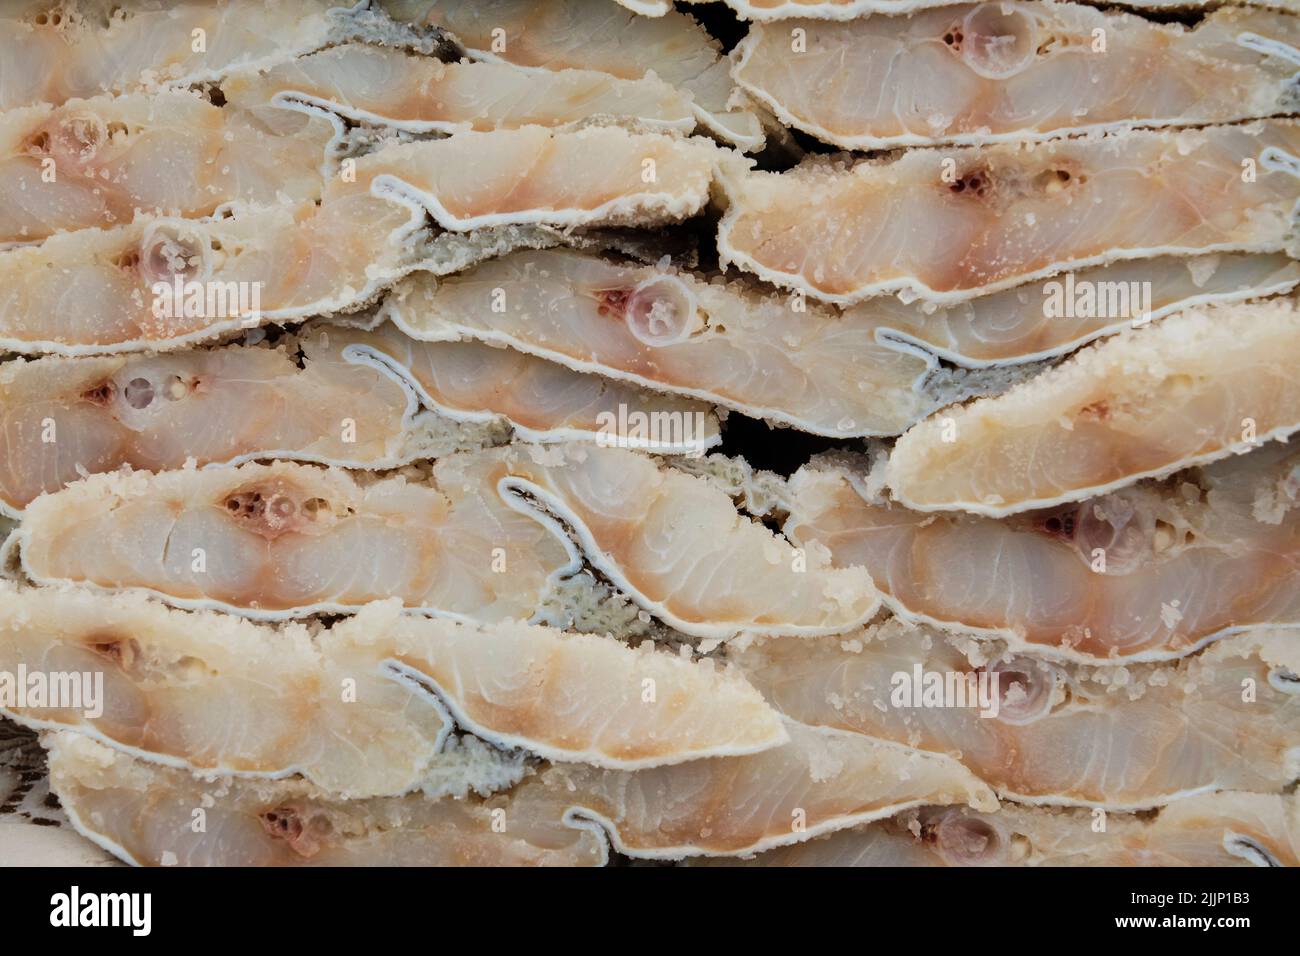 Full frame background of pieces of cod with salt stacked together on stall Stock Photo